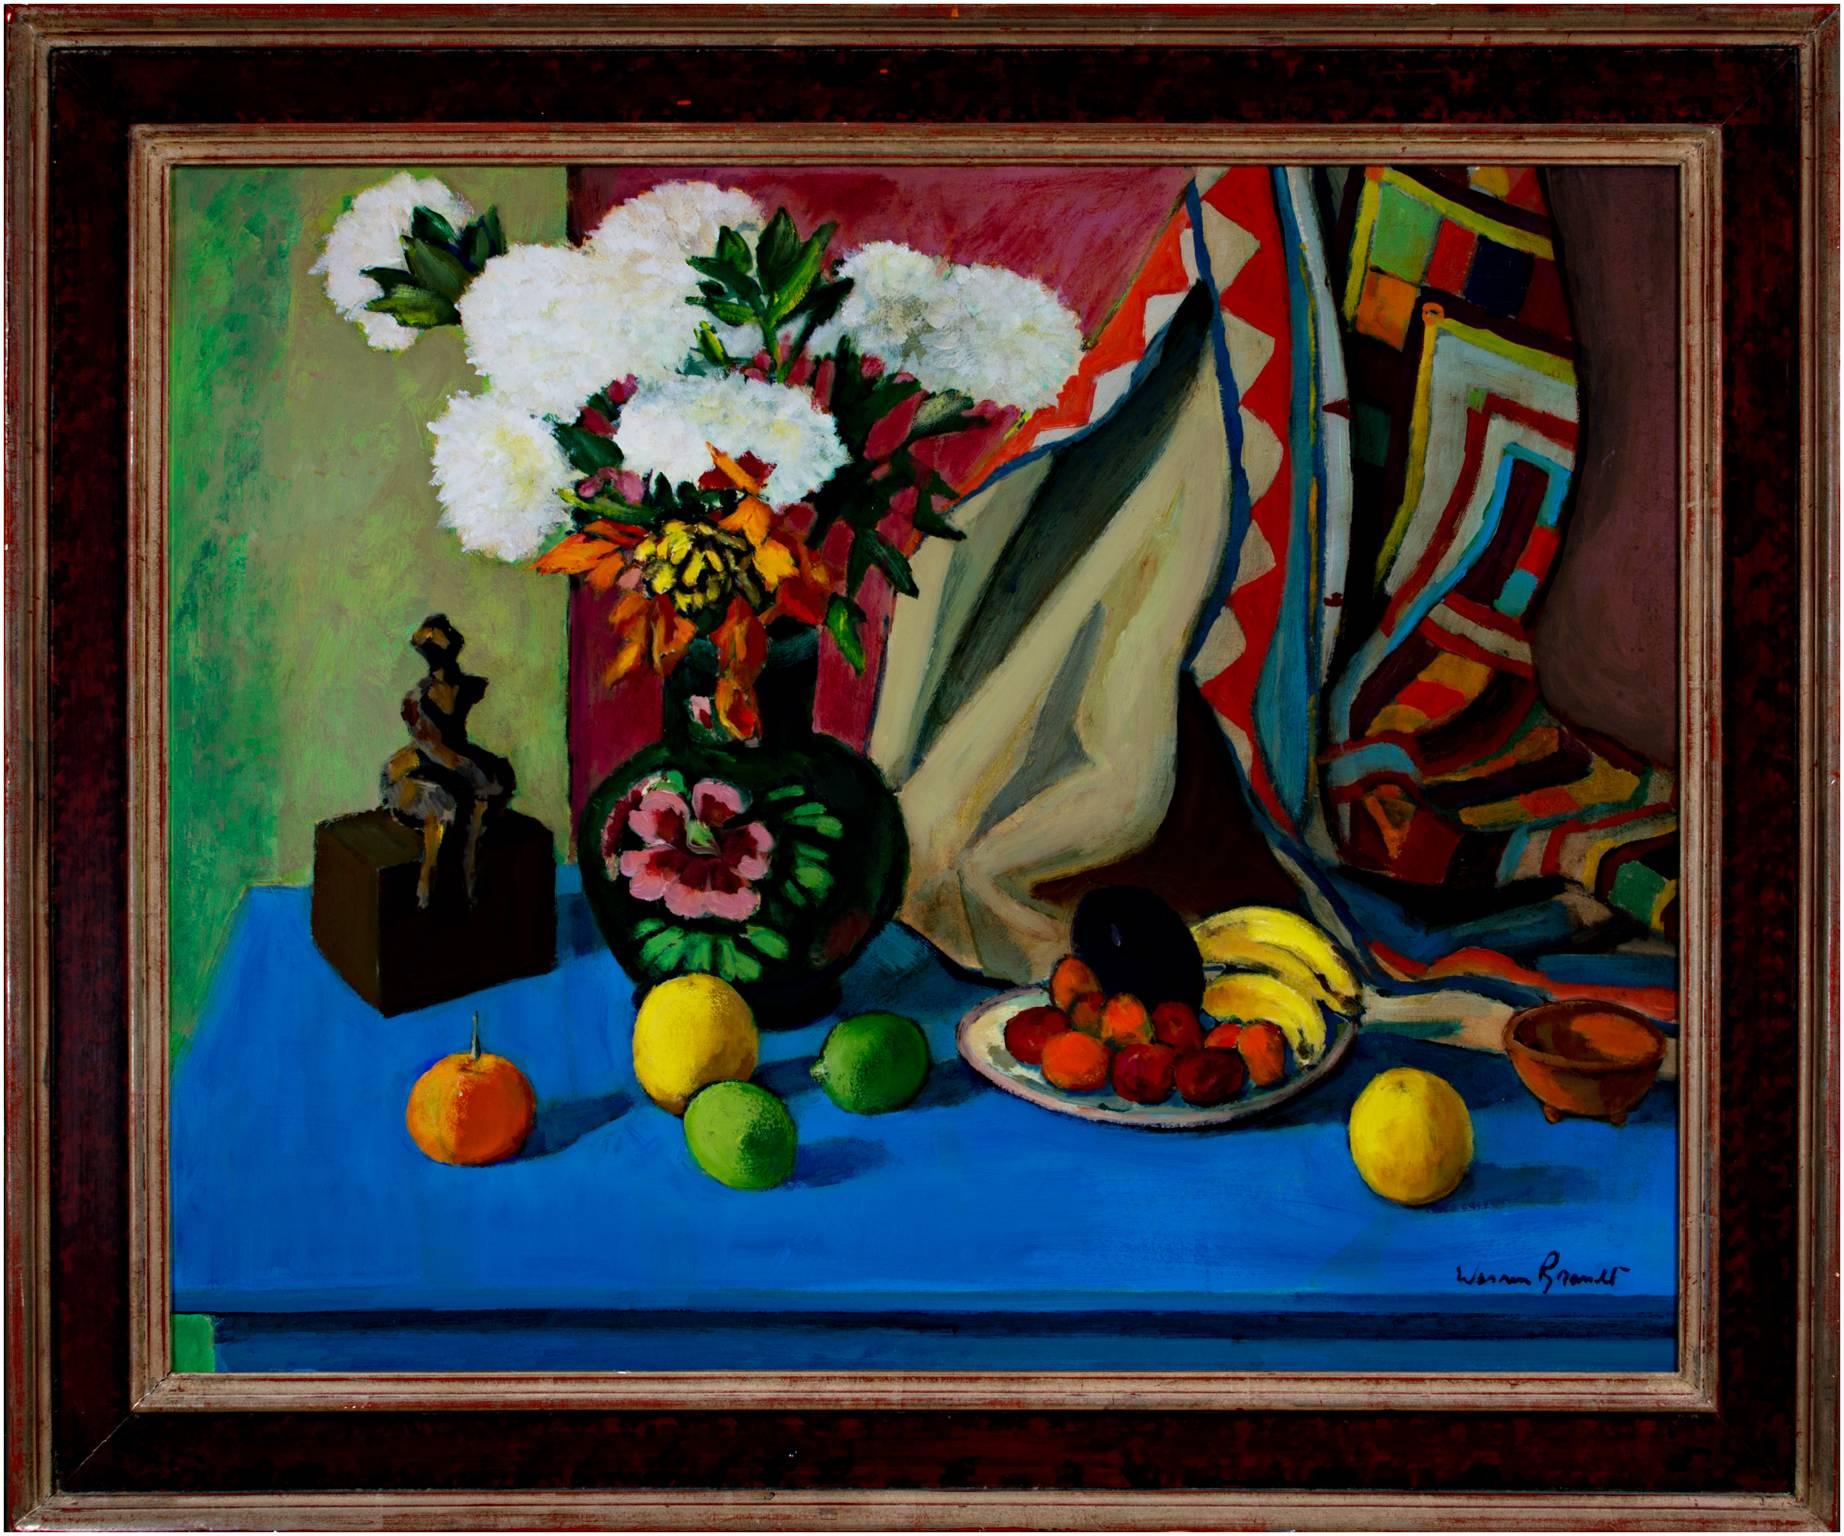 Rich, colorful, expressionist still life by American artist Warren Brandt featuring a decorative vase with white flowers, an assortment of fruit, and a small wooden sculpture against a bright blue table. 

24